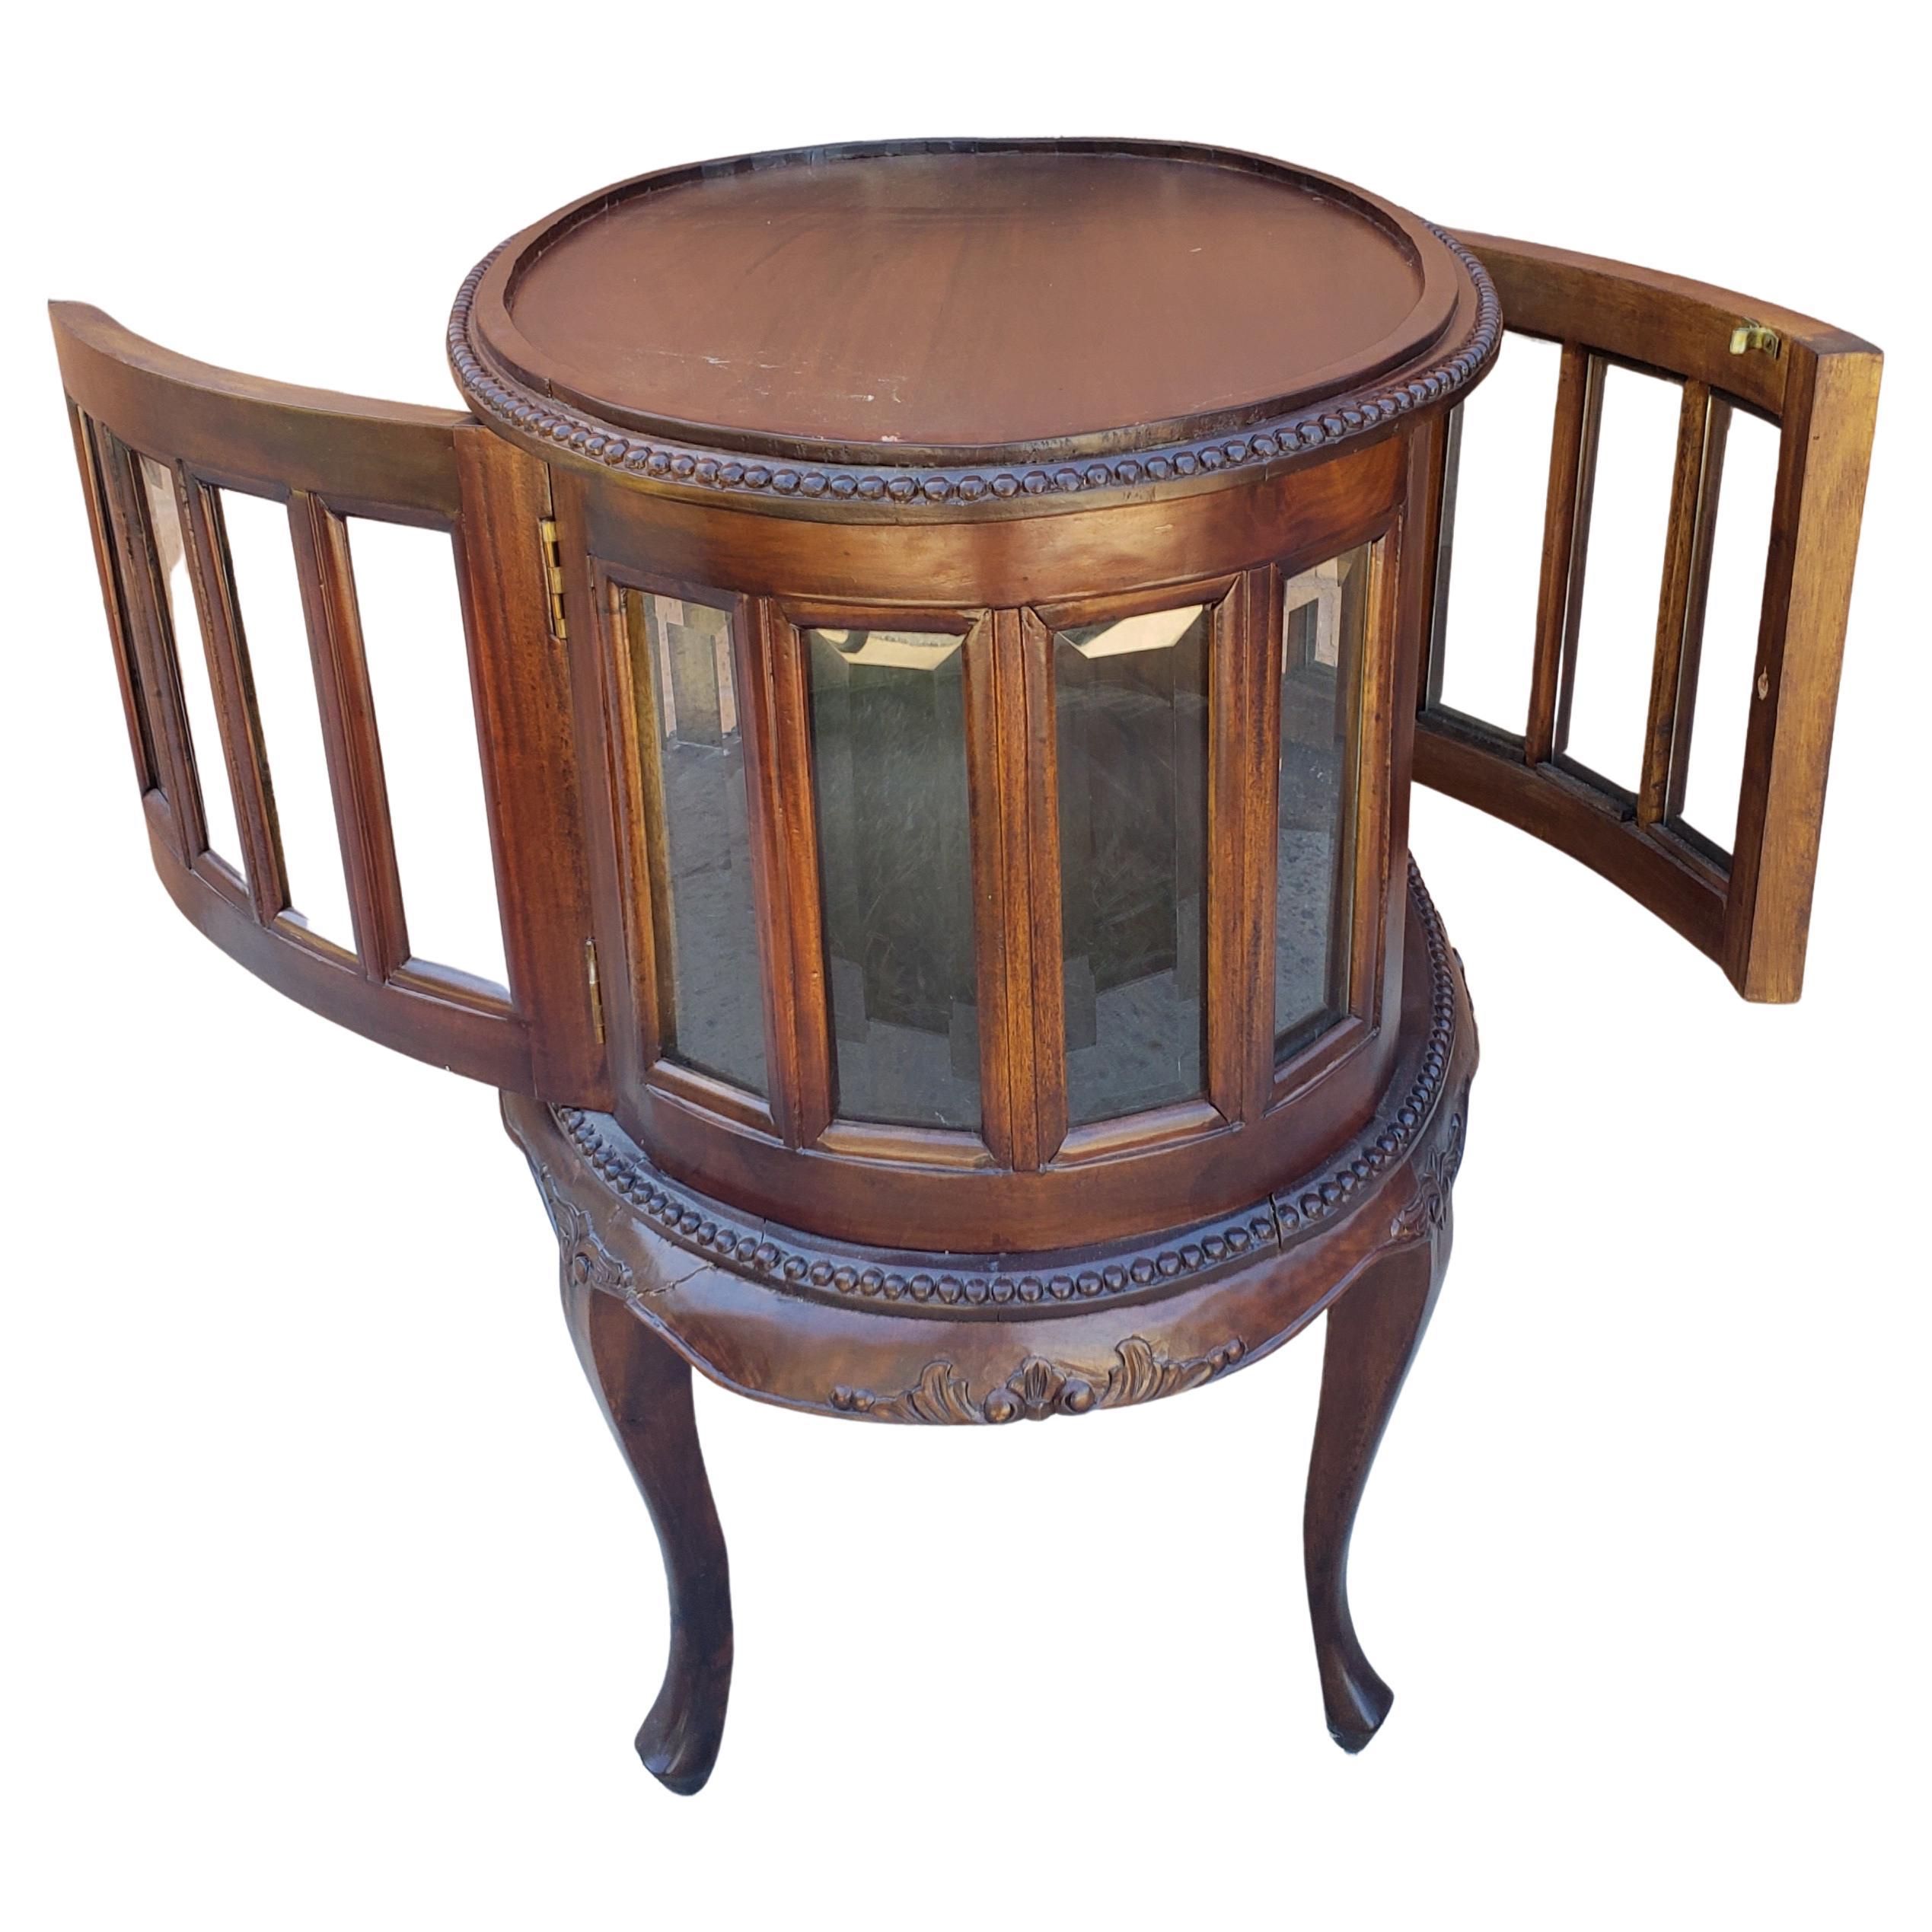 Hand-Crafted George III Style Mahogany Oval Vitrine Table with Two-Handle Tray Top